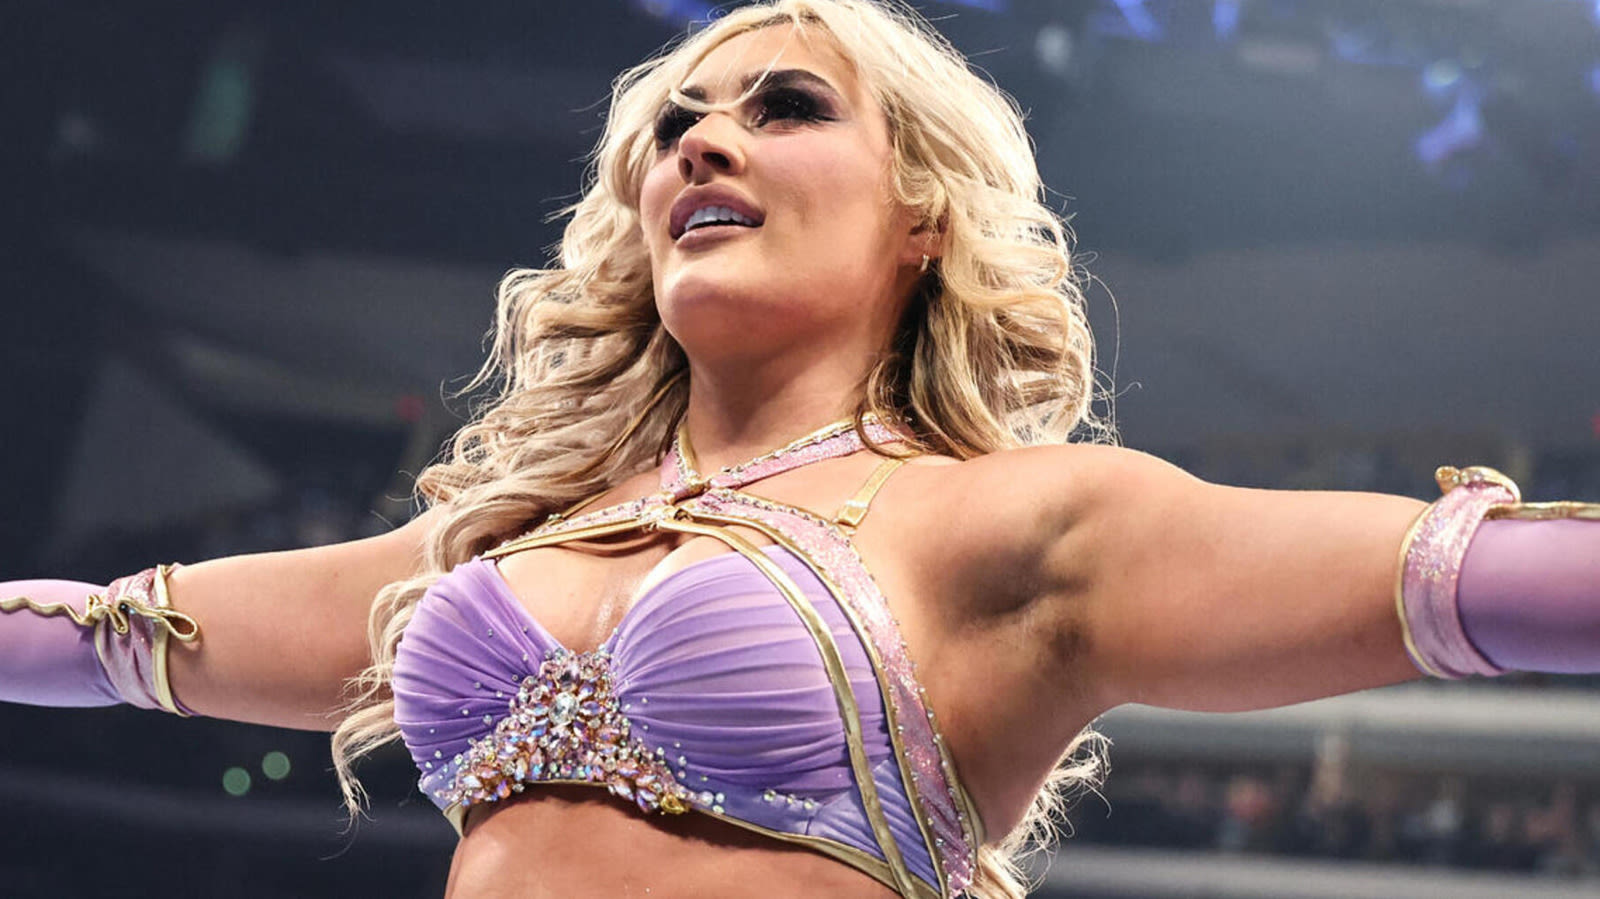 Tiffany Stratton Addresses Controversial Instagram Post Ahead Of WWE Money In The Bank - Wrestling Inc.